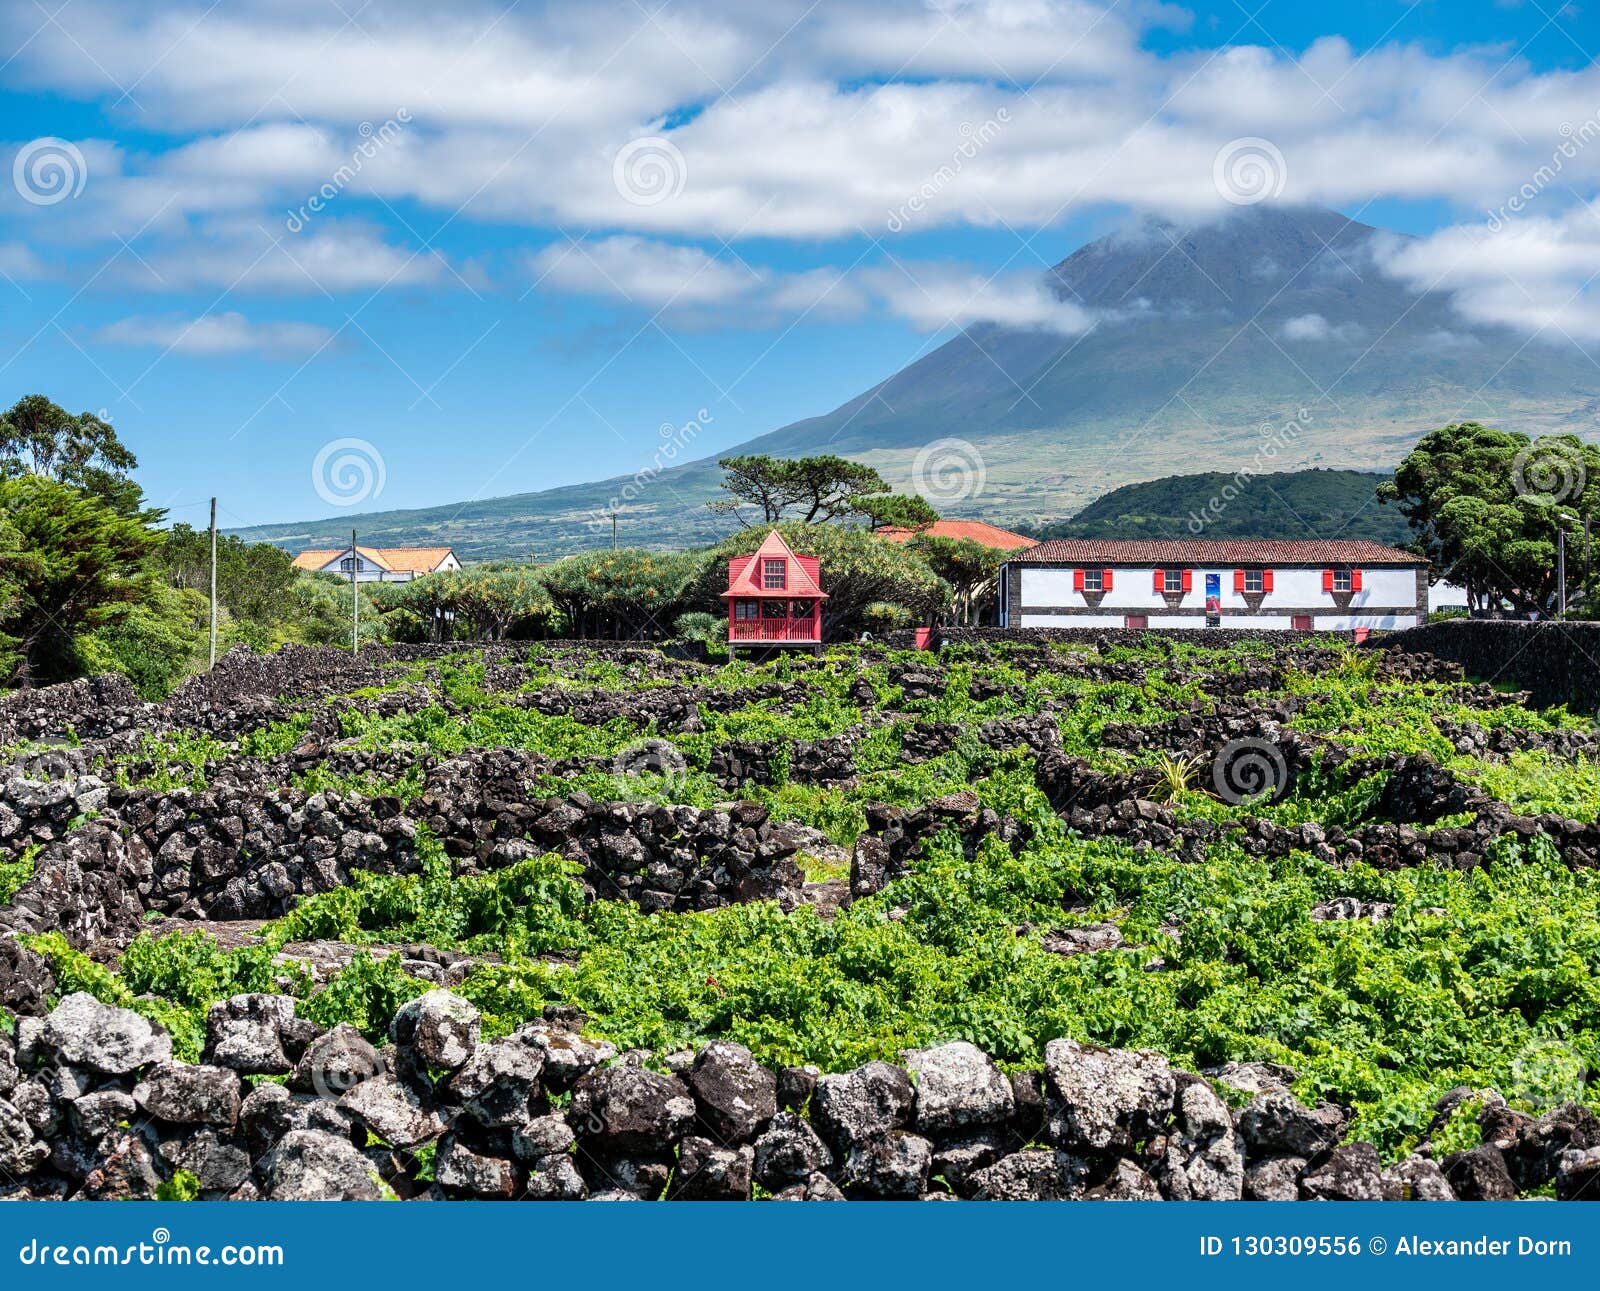 image of mountain pico with houses and vineyard on the island of pico azores